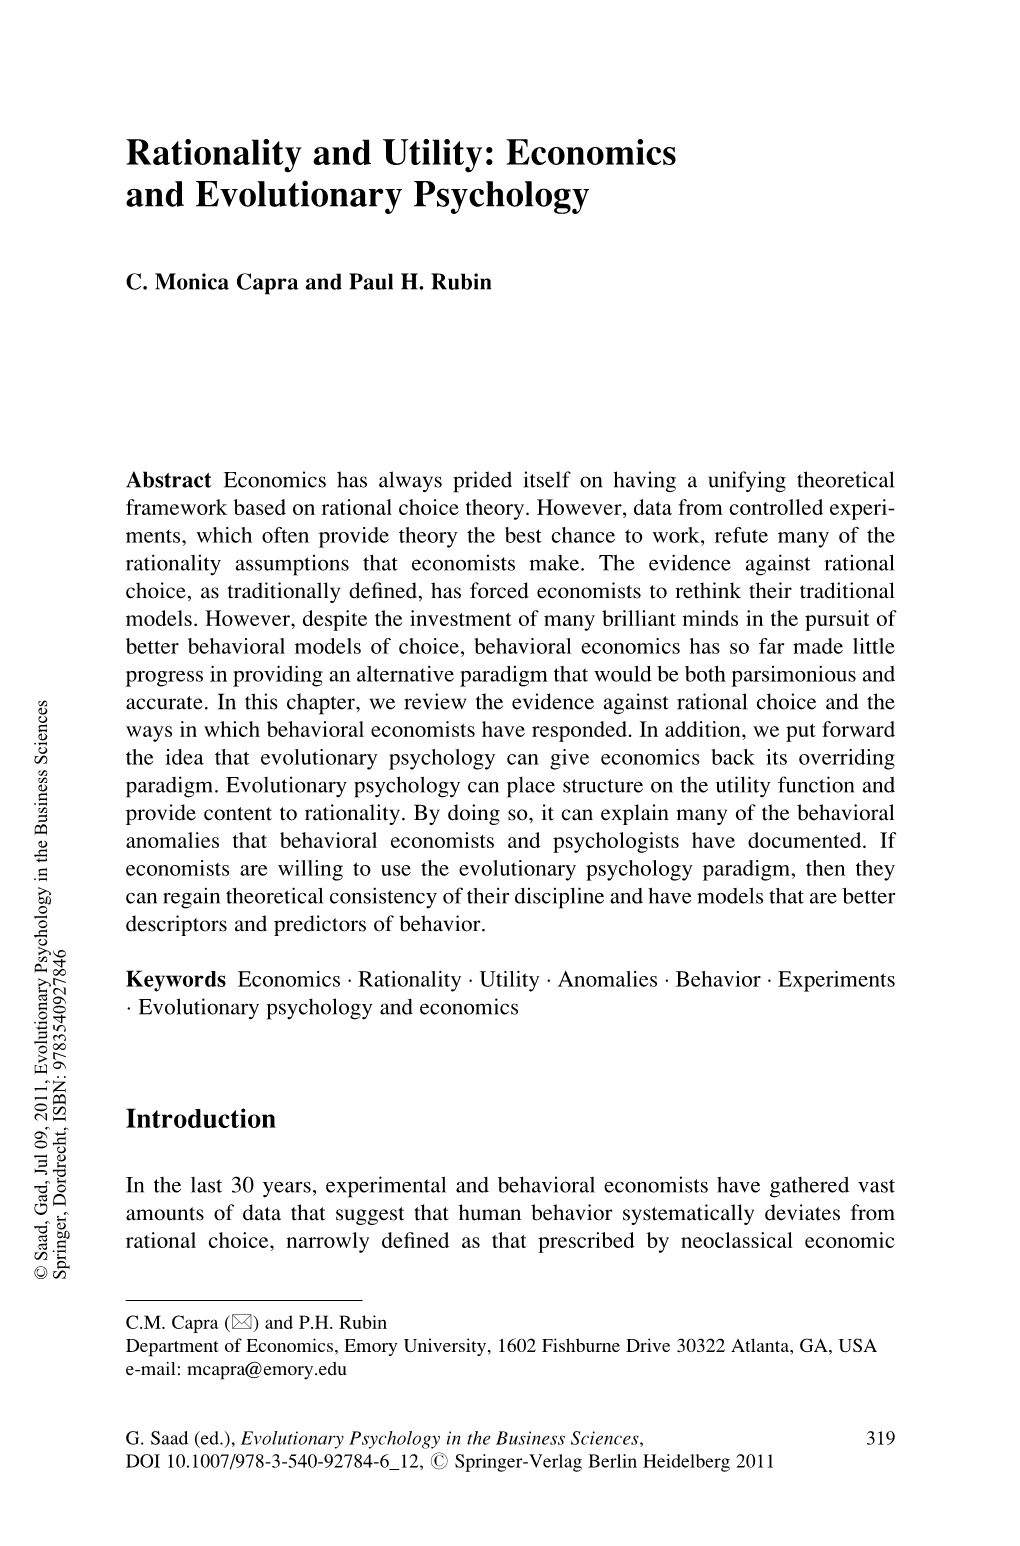 Rationality and Utility: Economics and Evolutionary Psychology